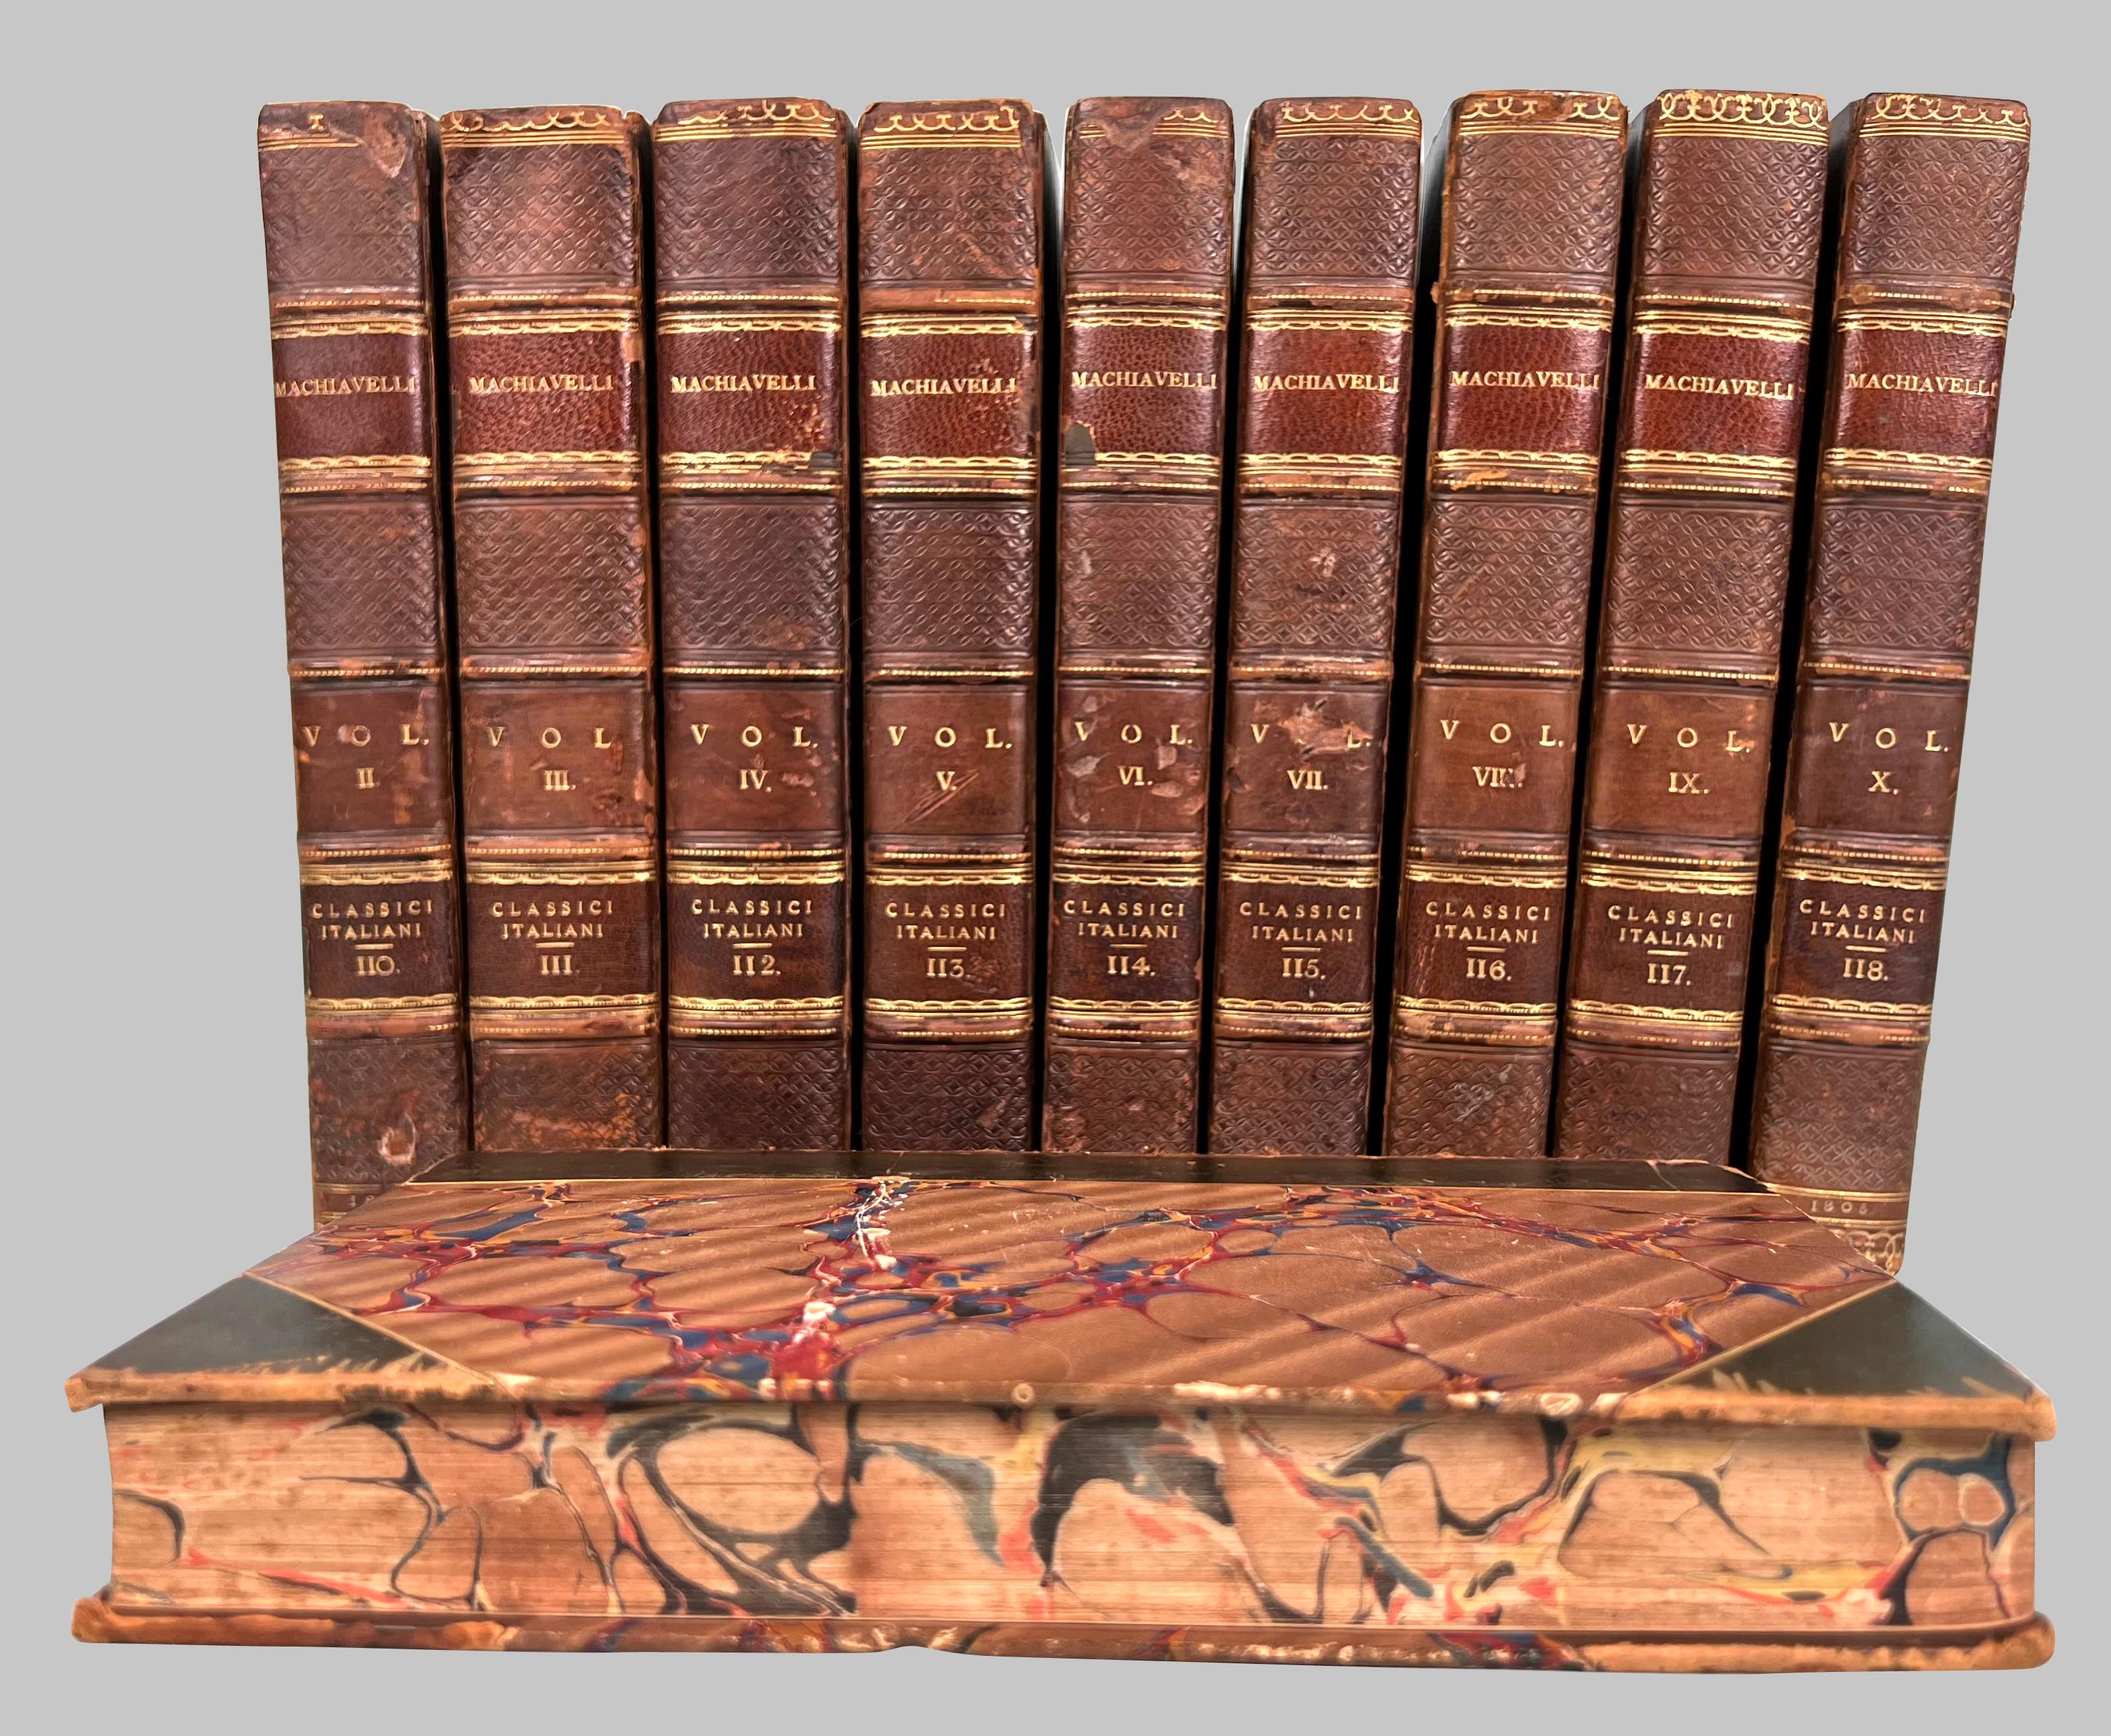 The works of Machiavelli in Italian, 10 volumes, published in Milan, 1804. 3/4 leather boards with marbleized paper endpapers and edges. The spines with raised gilt-tooled bands. A lovely set of this very famous author's work.